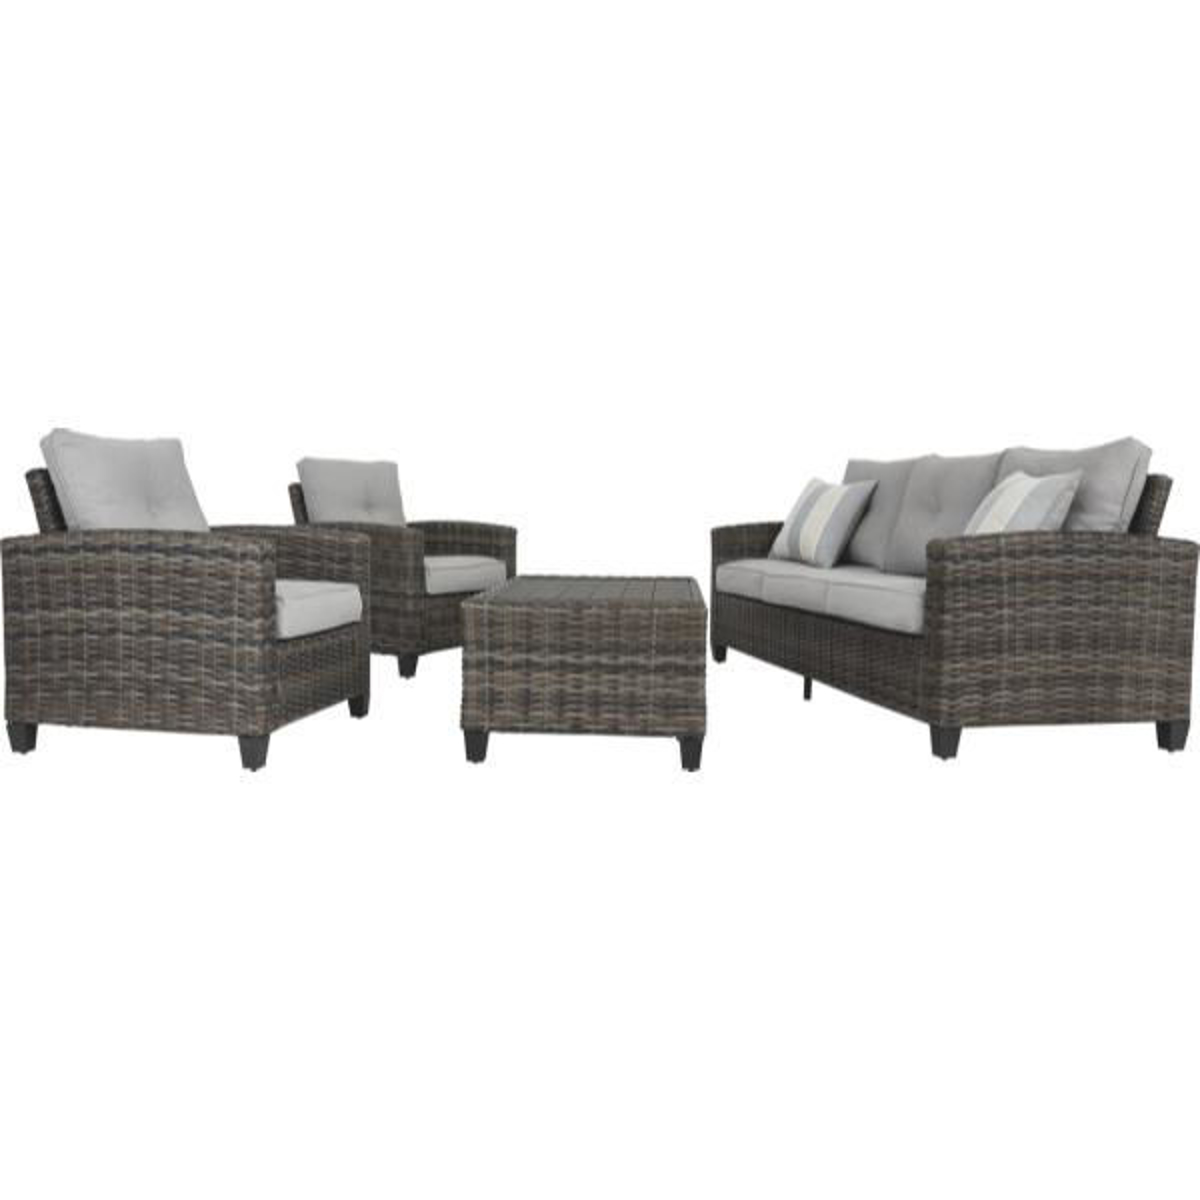 Picture of ROSEMARY SOFA/CHAIRS/TABLE SET